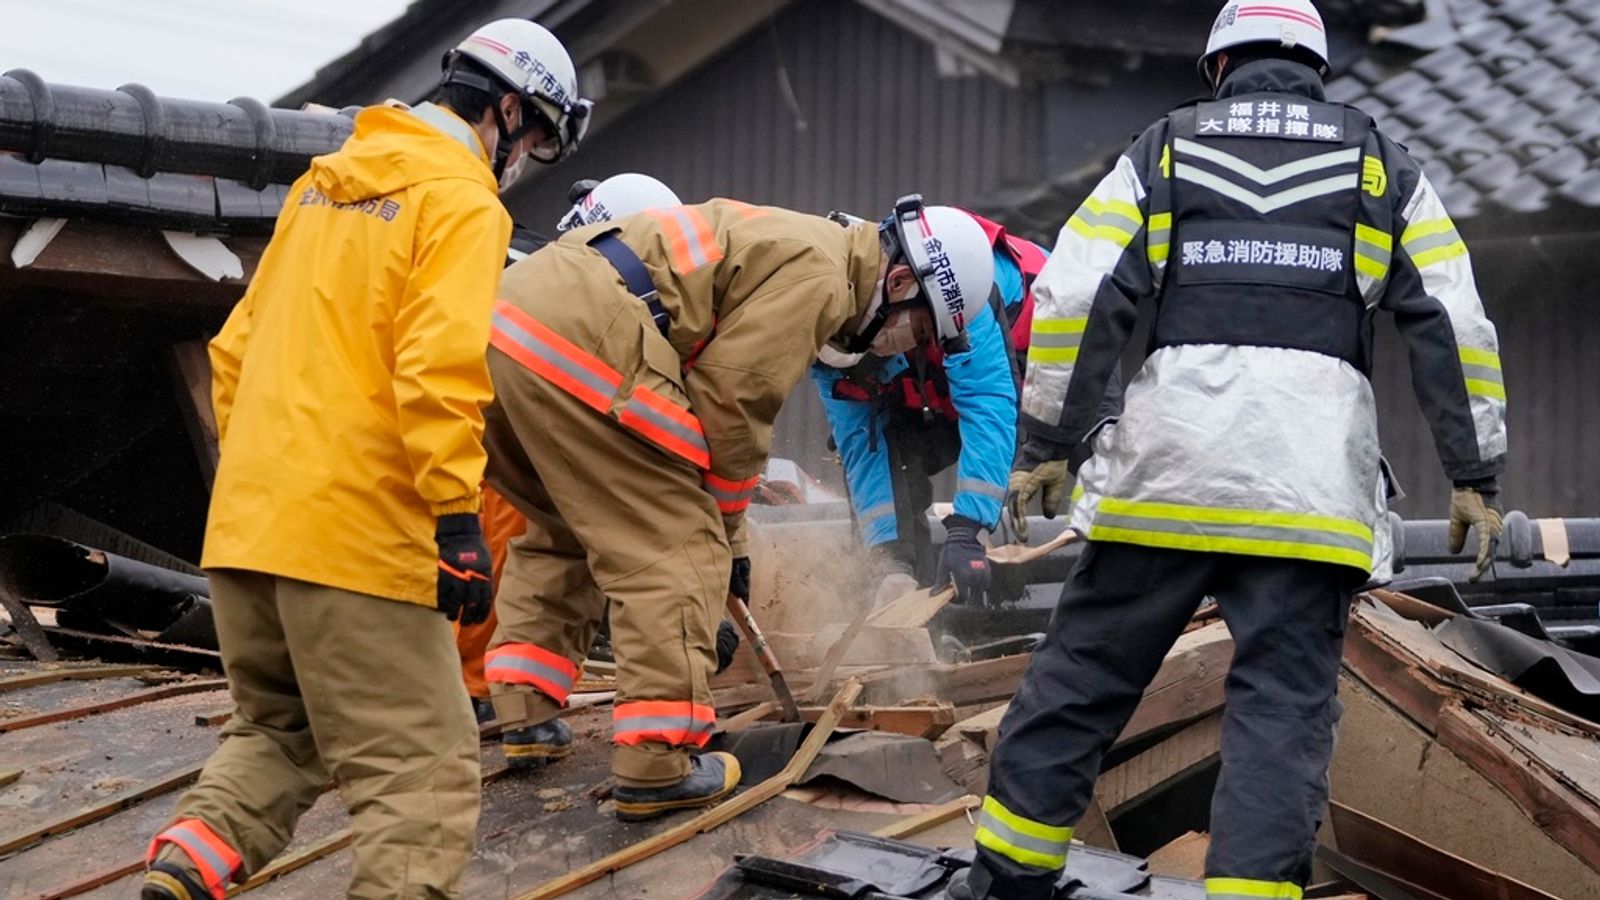 Rescue teams in Japan race against time to find earthquake survivors